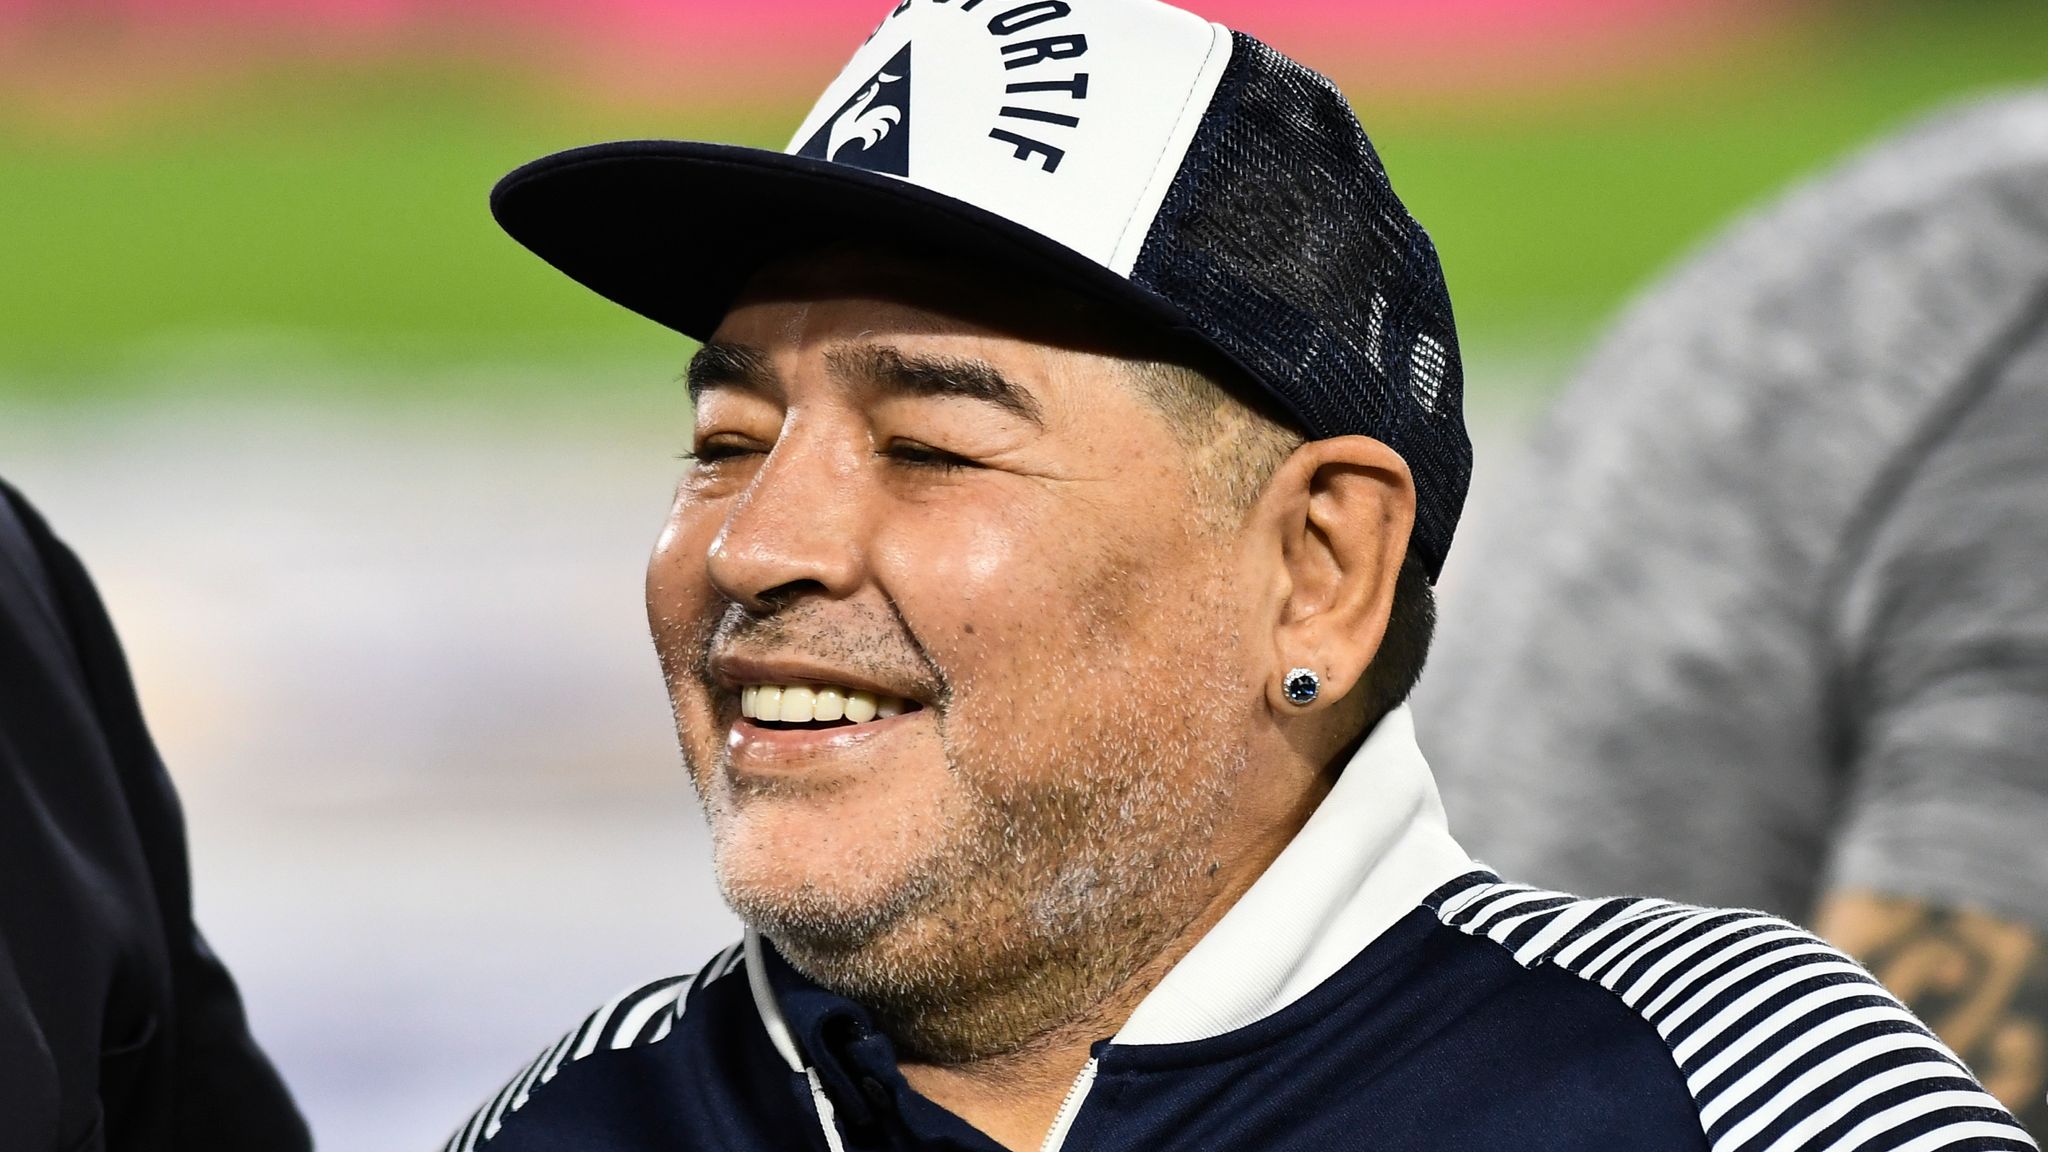 Maradona dead: Tributes paid to football legend as Lineker hopes he will 'find some comfort in the hands of God'